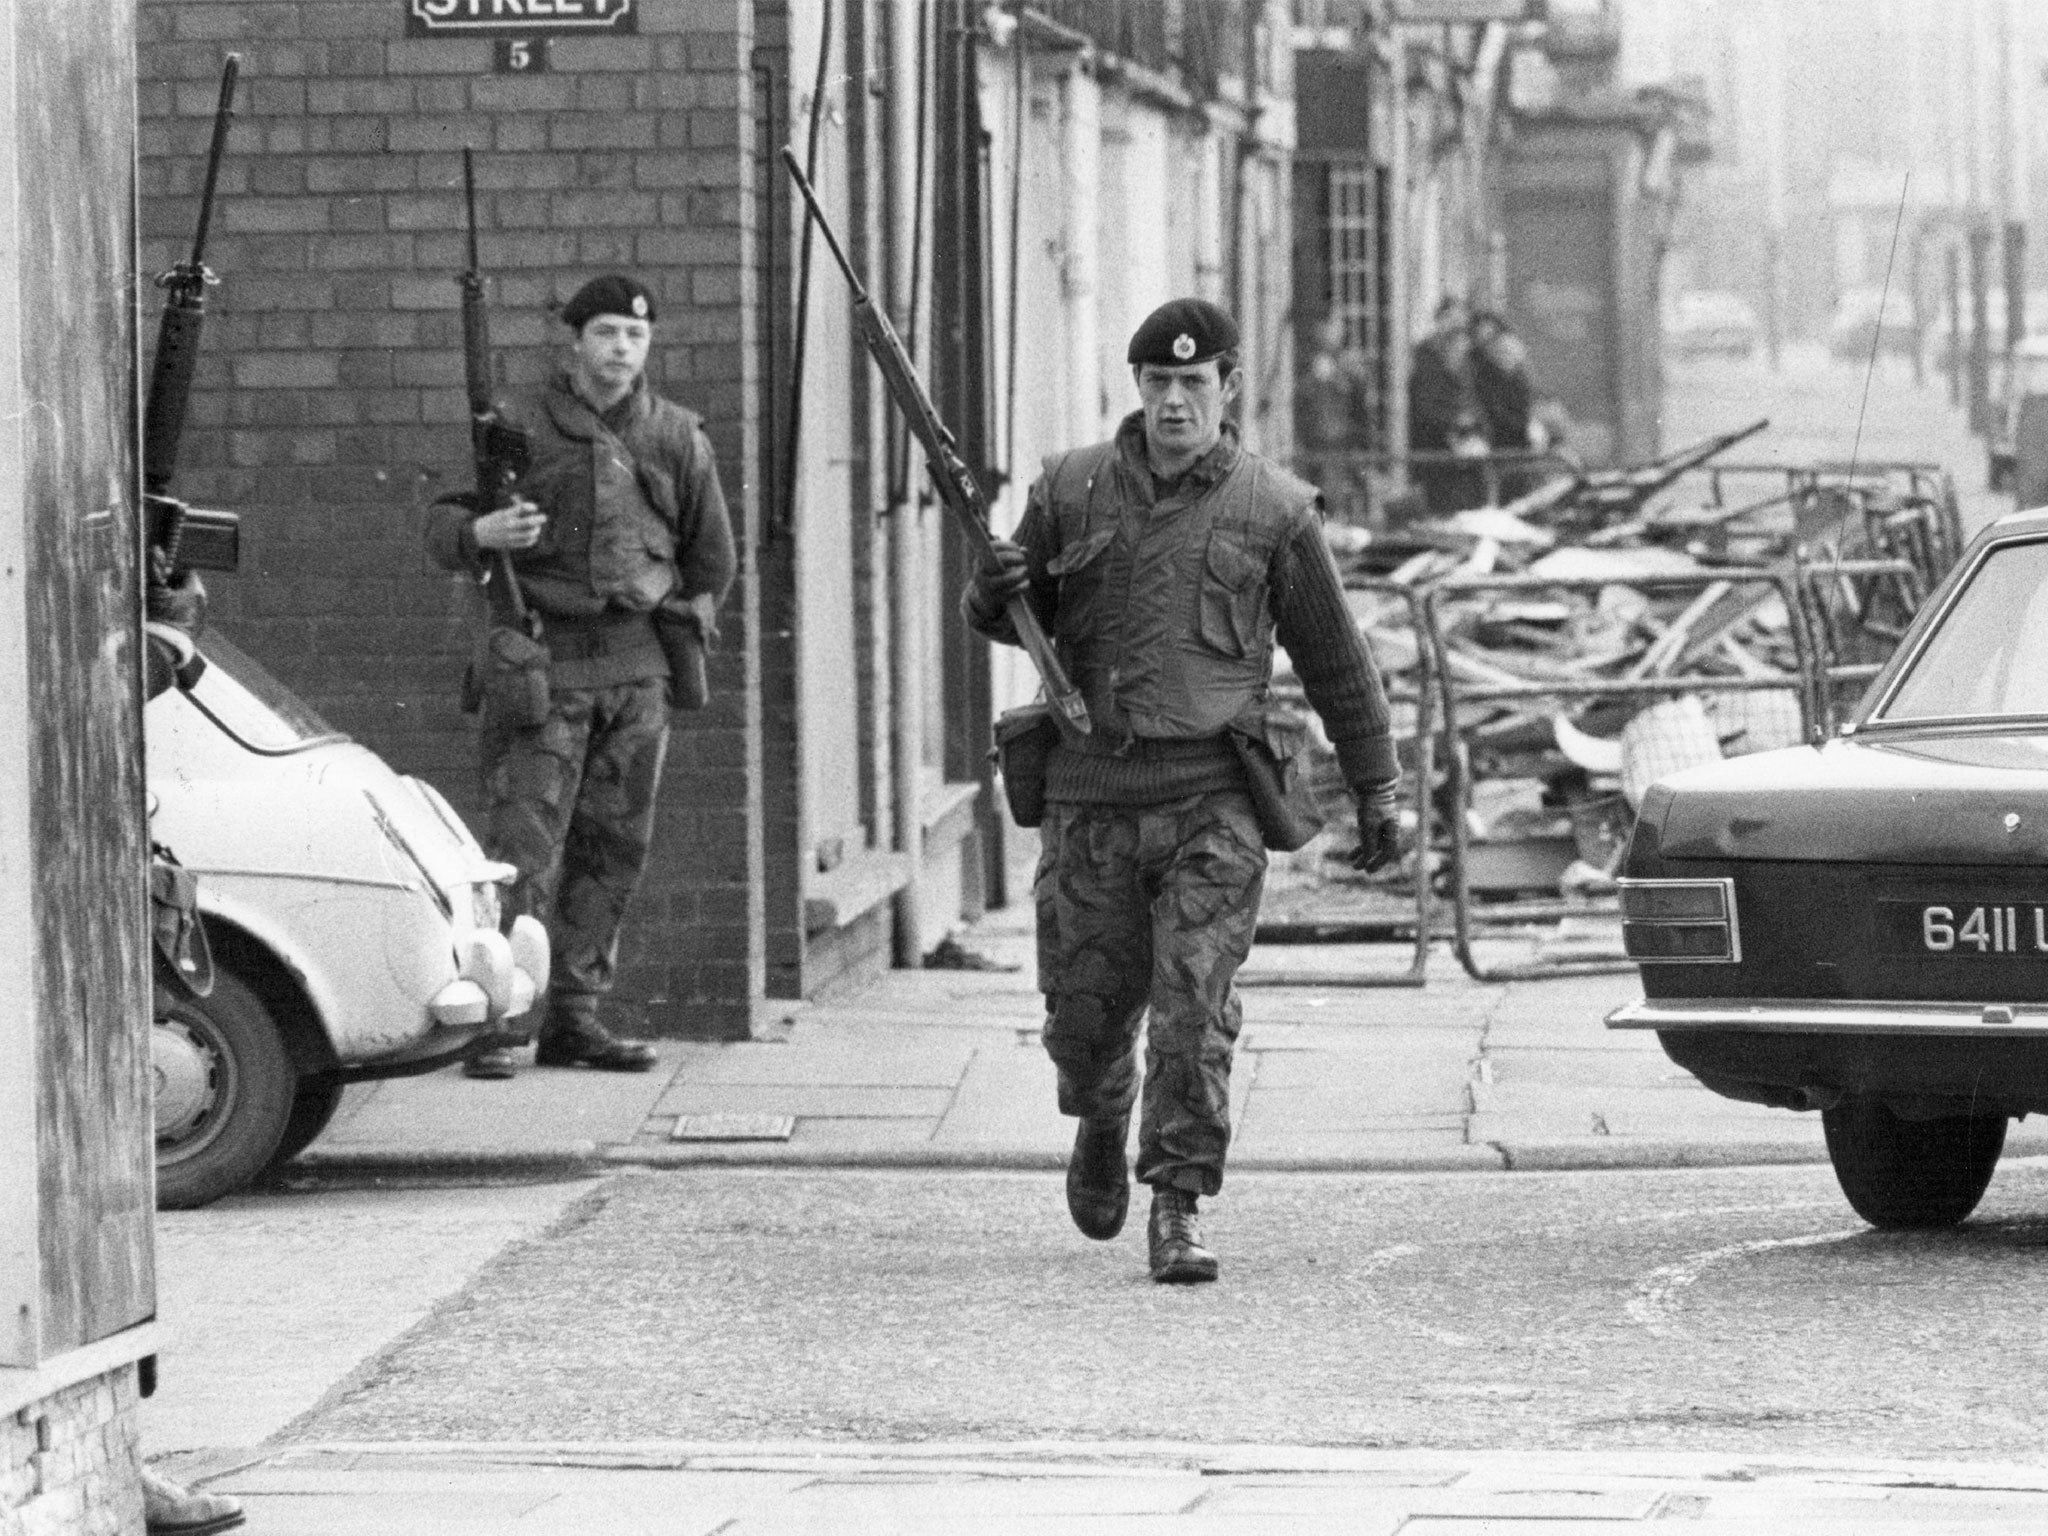 Armed British soldiers patrolling the streets of Belfast during the Official IRA's unconditional ceasefire in 1972